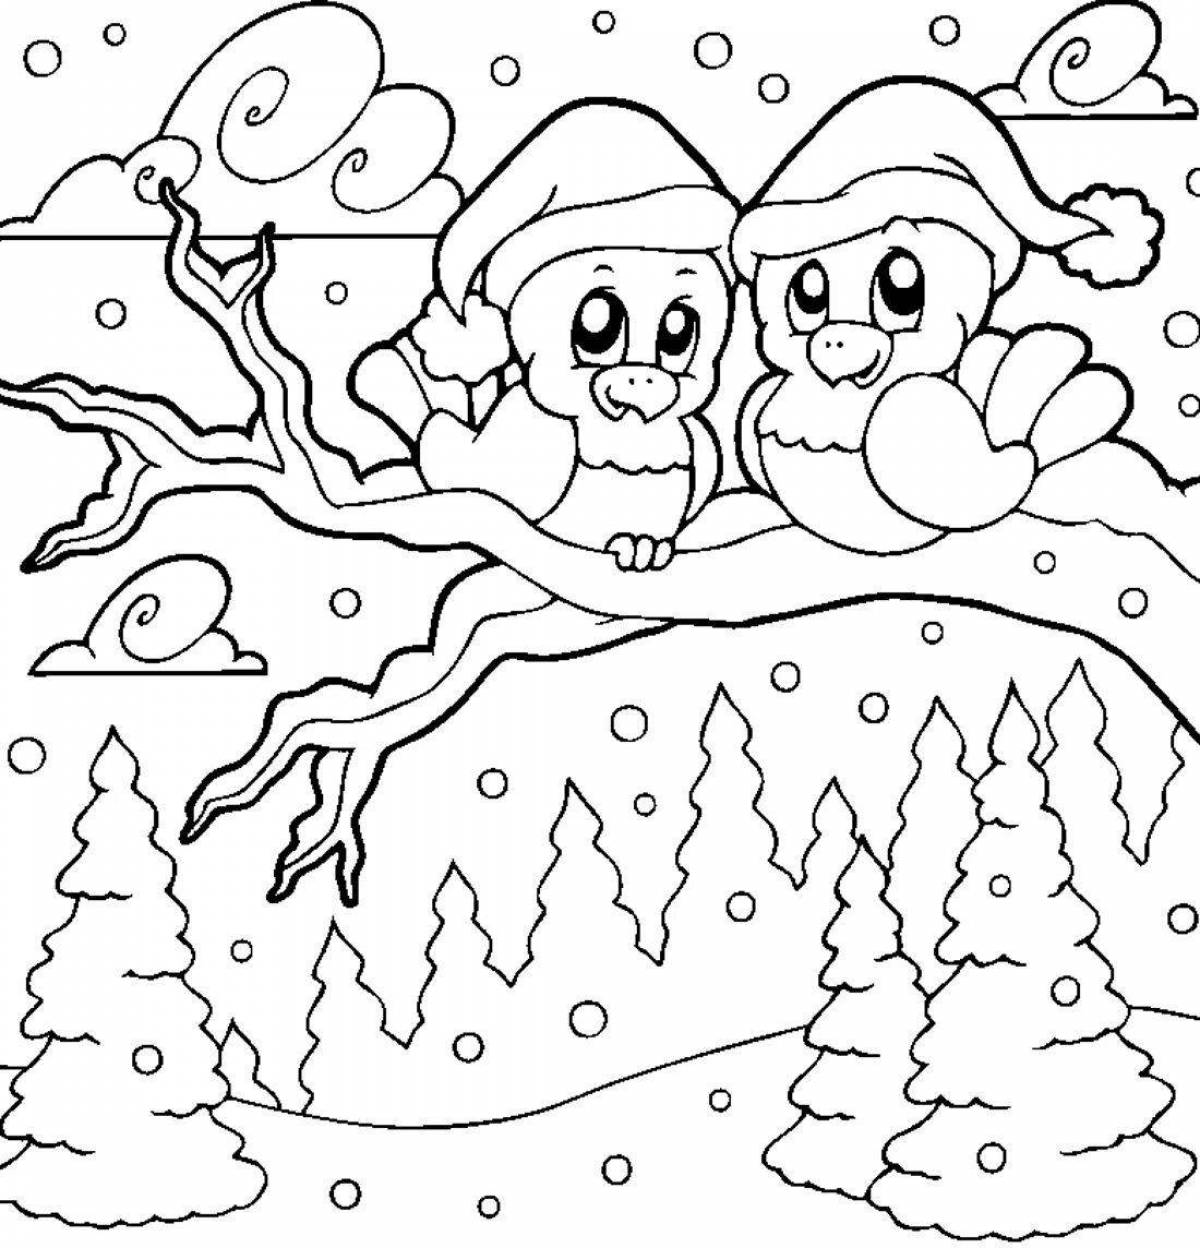 Coloring happy winter nature